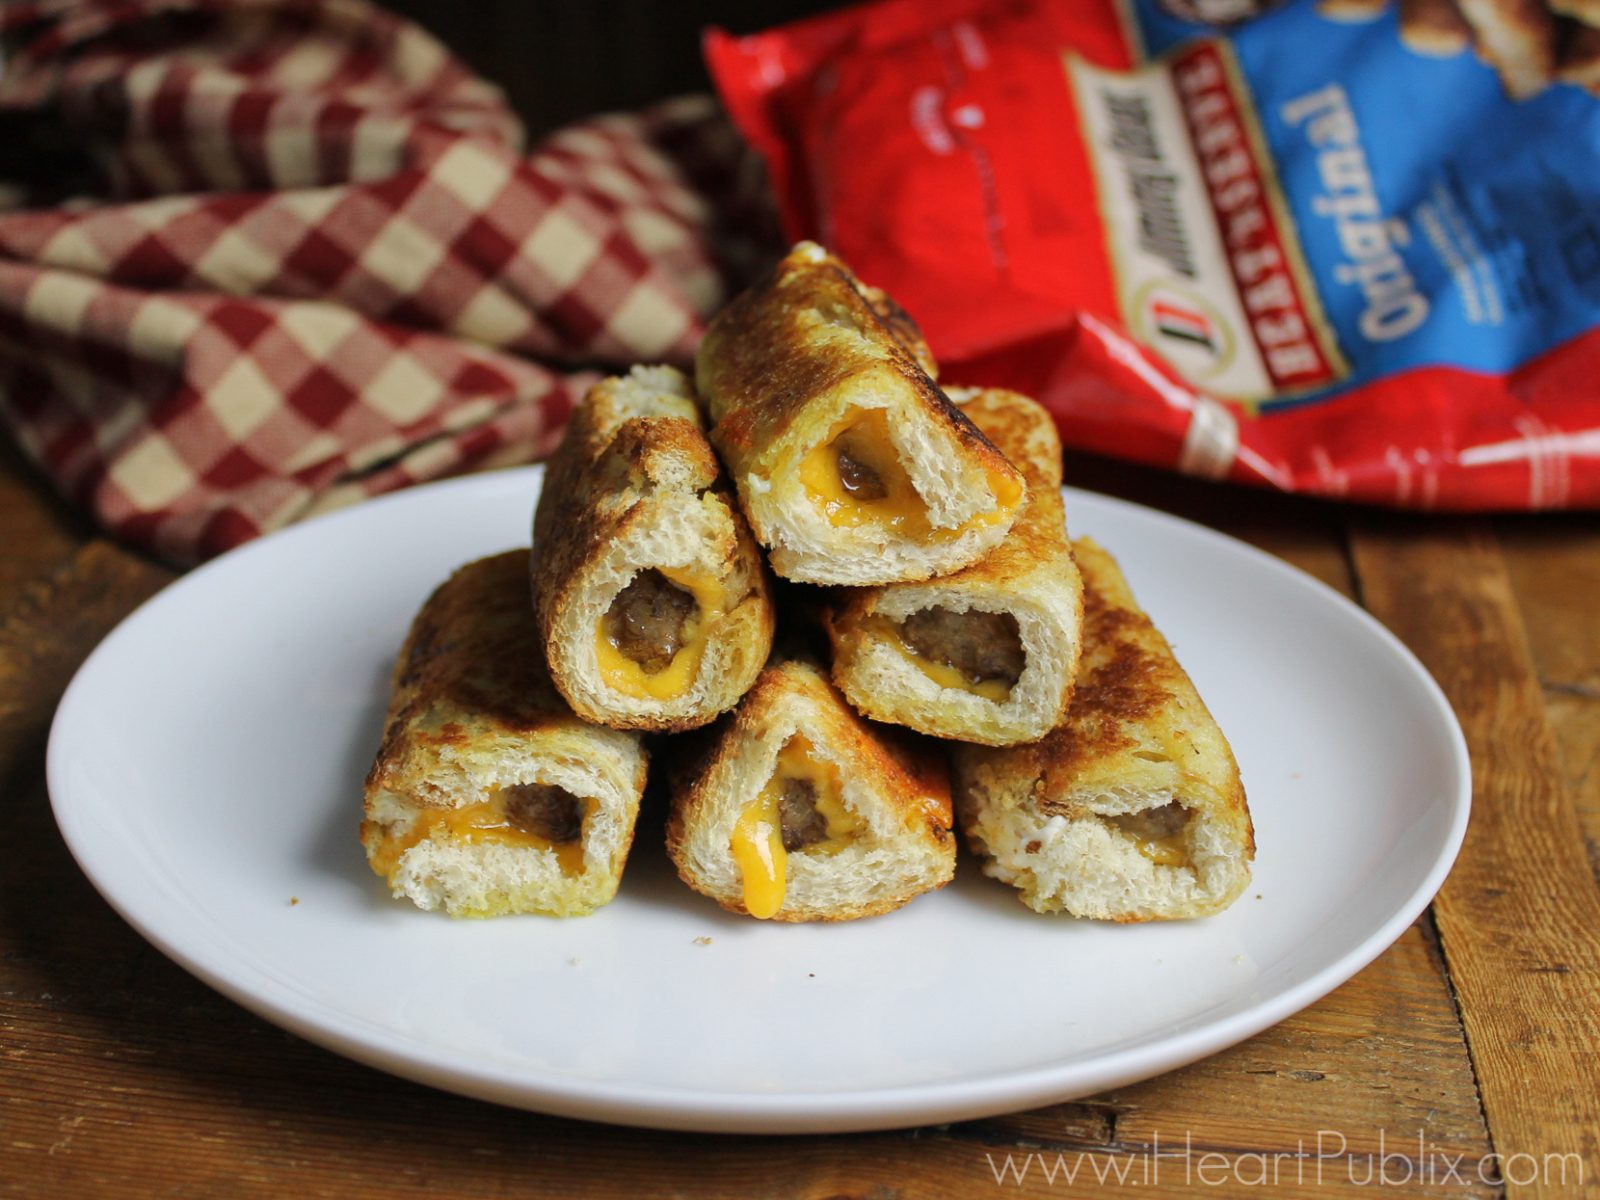 Grilled Cheese Sausage Roll-Ups Made With Jimmy Dean Sausage – Easy & Delicious Breakfast For Your Busy Morning!